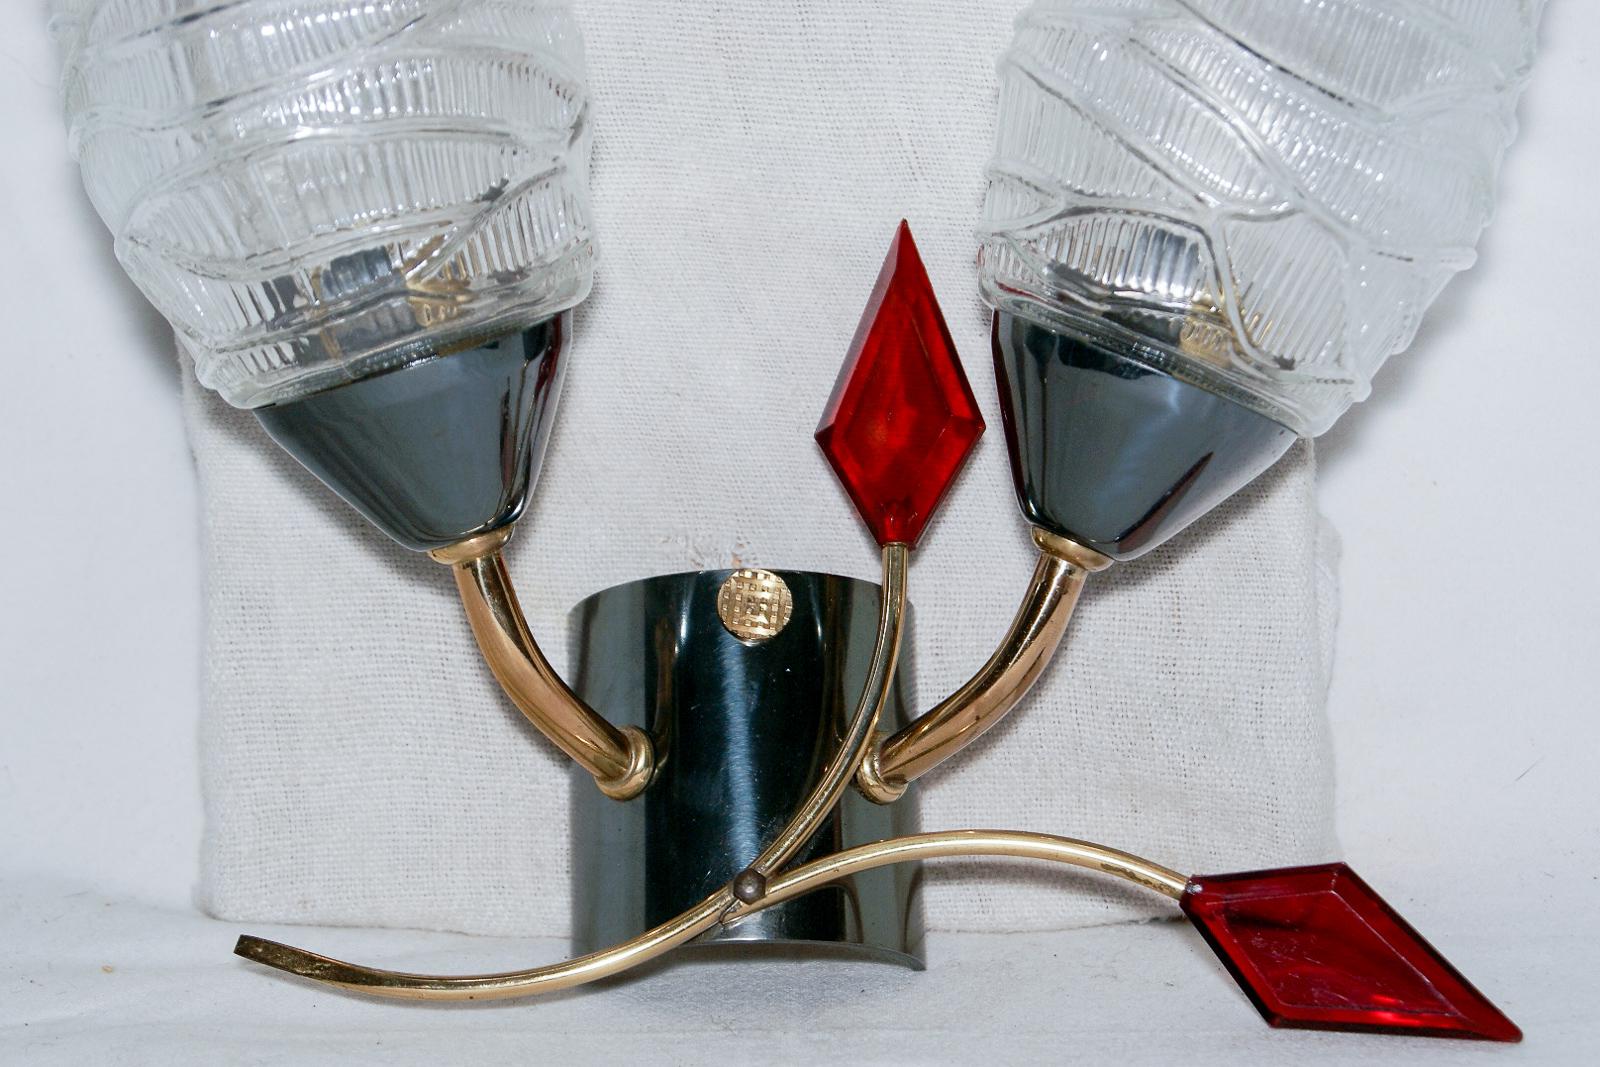 An elegant pair of midcentury wall sconces by Maison Arlus, 1950s-1960s, France.

These midcentury modern, 1950s-1960s originals feature two conical glass shades mounted on an asymmetrical curved double brass structure with charming ruby red lucite